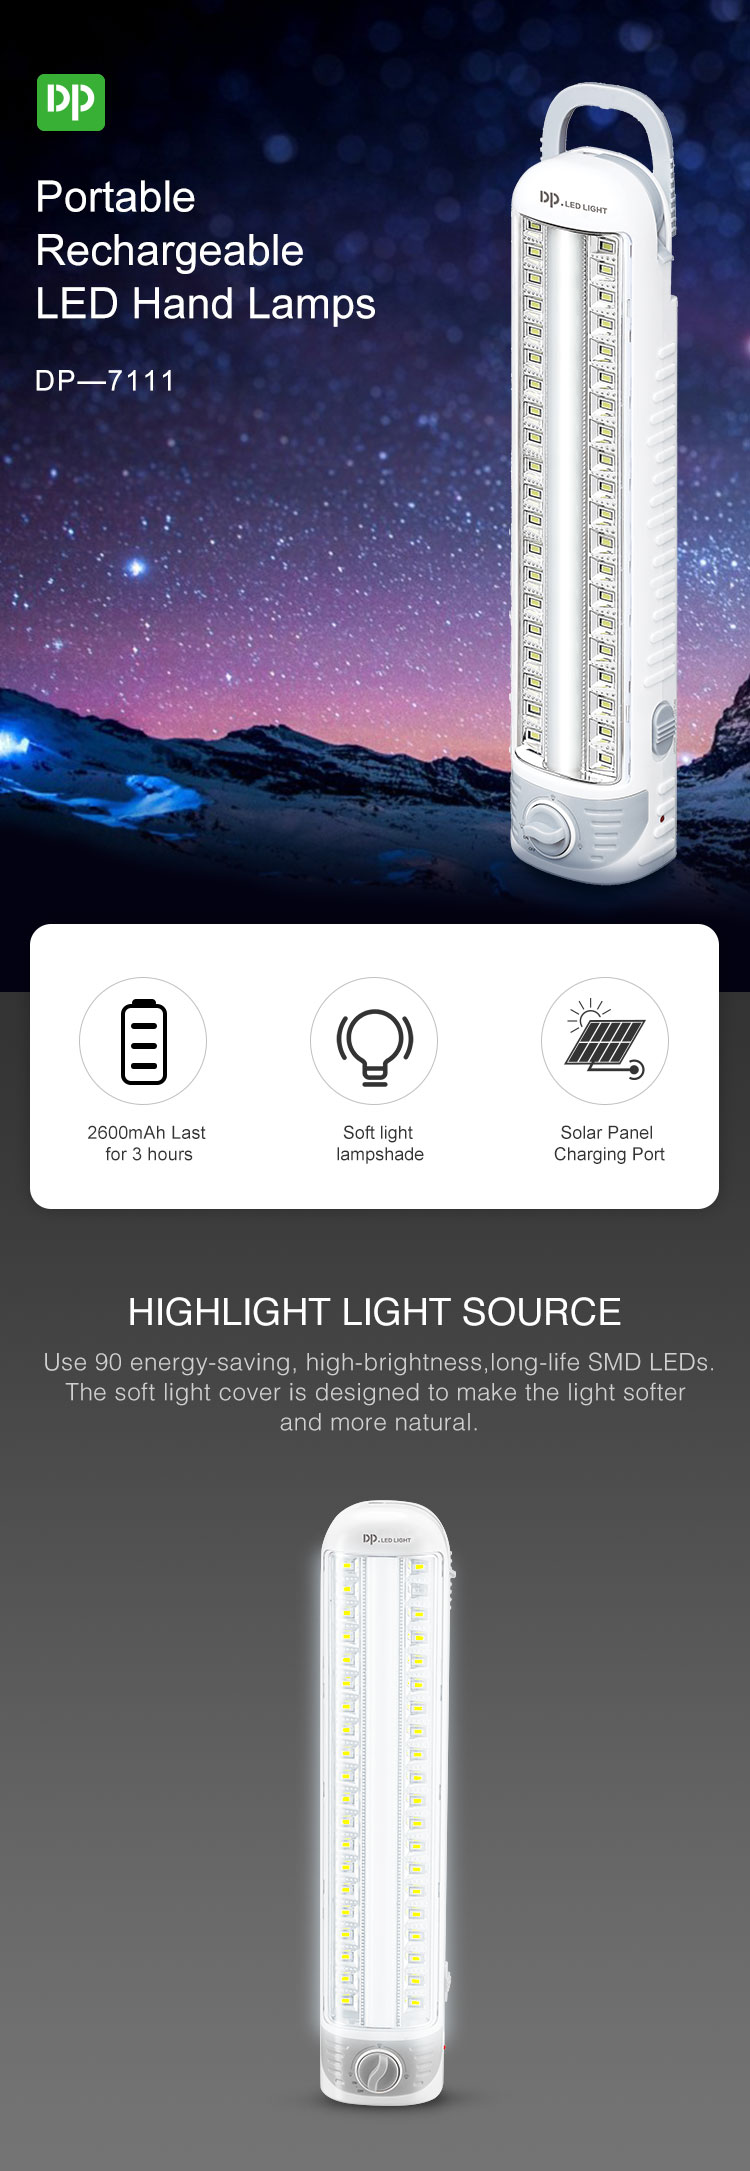 DP 7111 widely use rechargeable LED emergency light详情图1